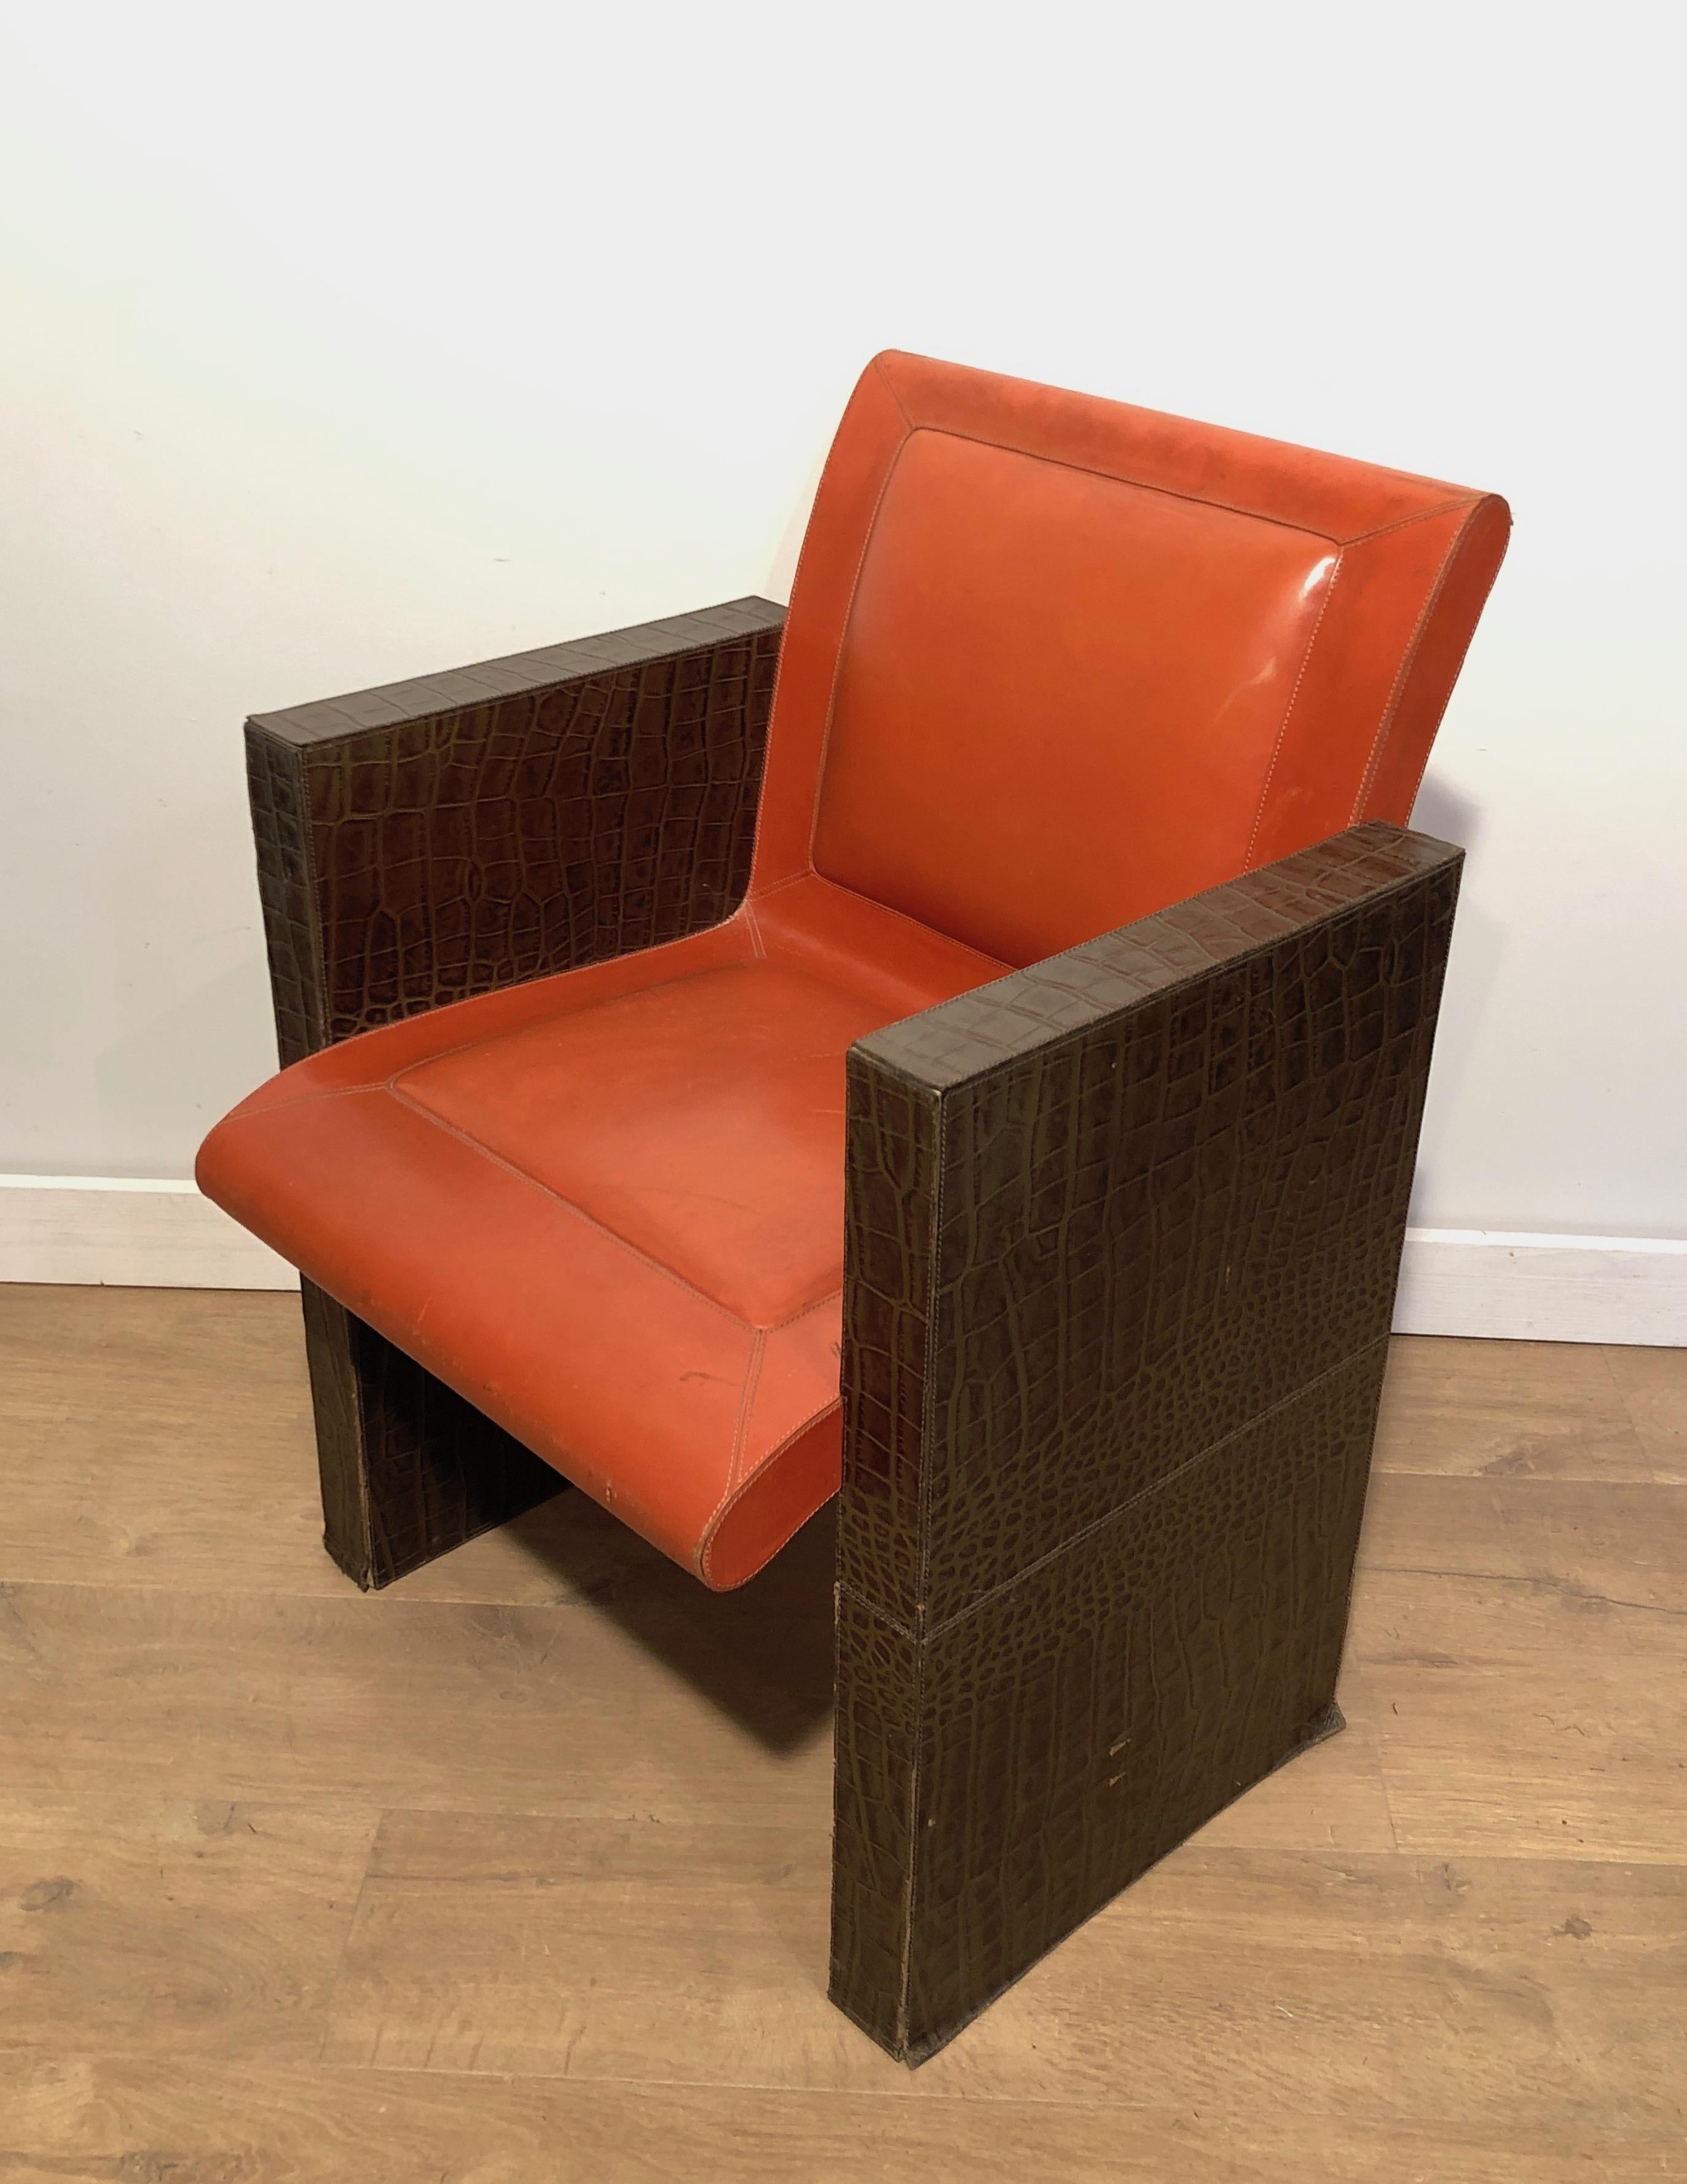 Leather Pair of orangeish and brown leather armchairs (Can be sold individually). French For Sale